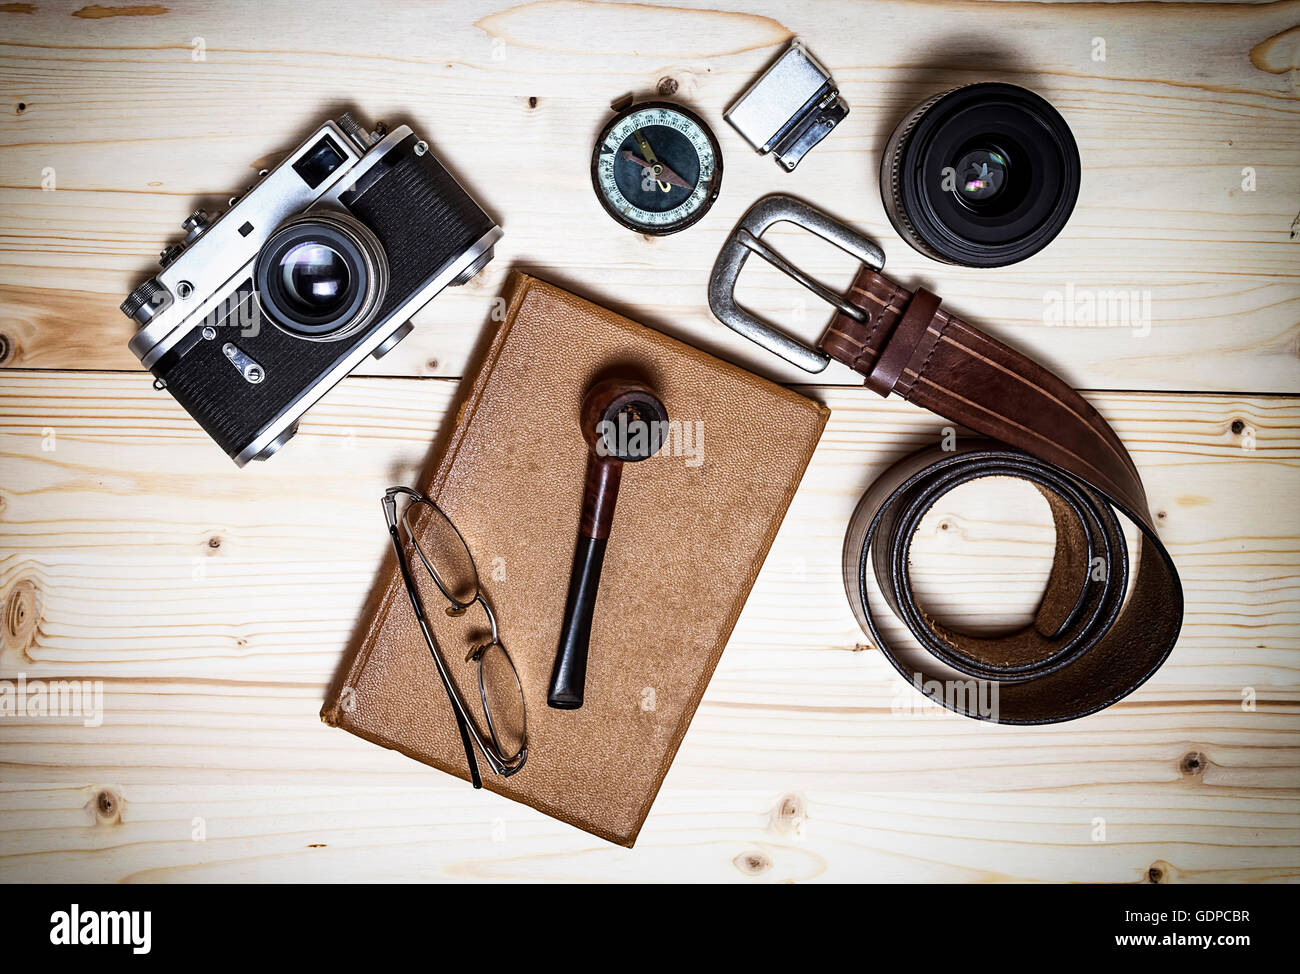 Still life with retro object. Book with compact old camera, compass, cigarette lighter, belt, glasses, pipe, dslr lens on wood t Stock Photo